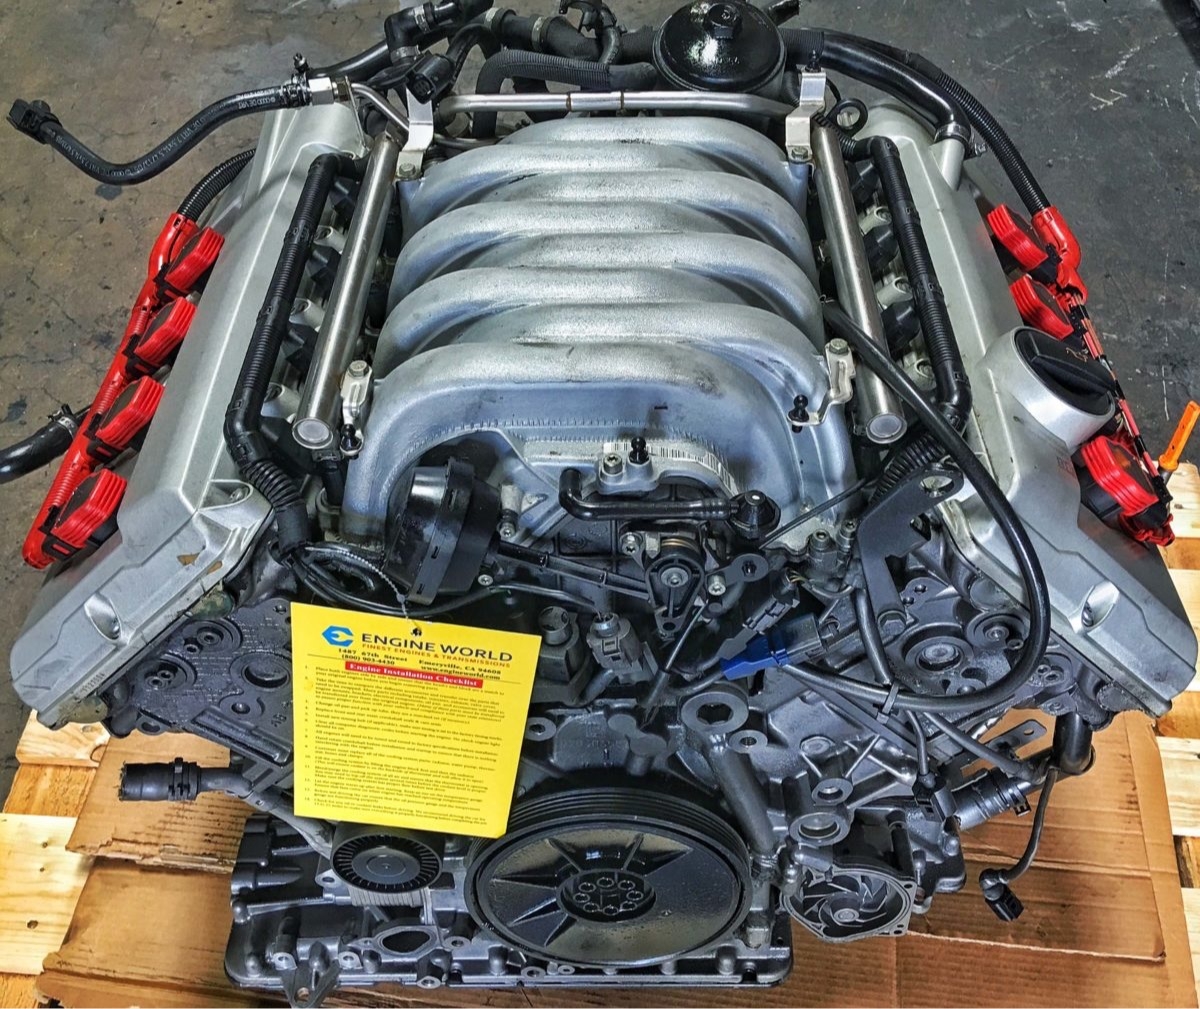 
The Advantages of Purchasing Used Engines and Transmissions from Fort Collins Auto Salvage Yards